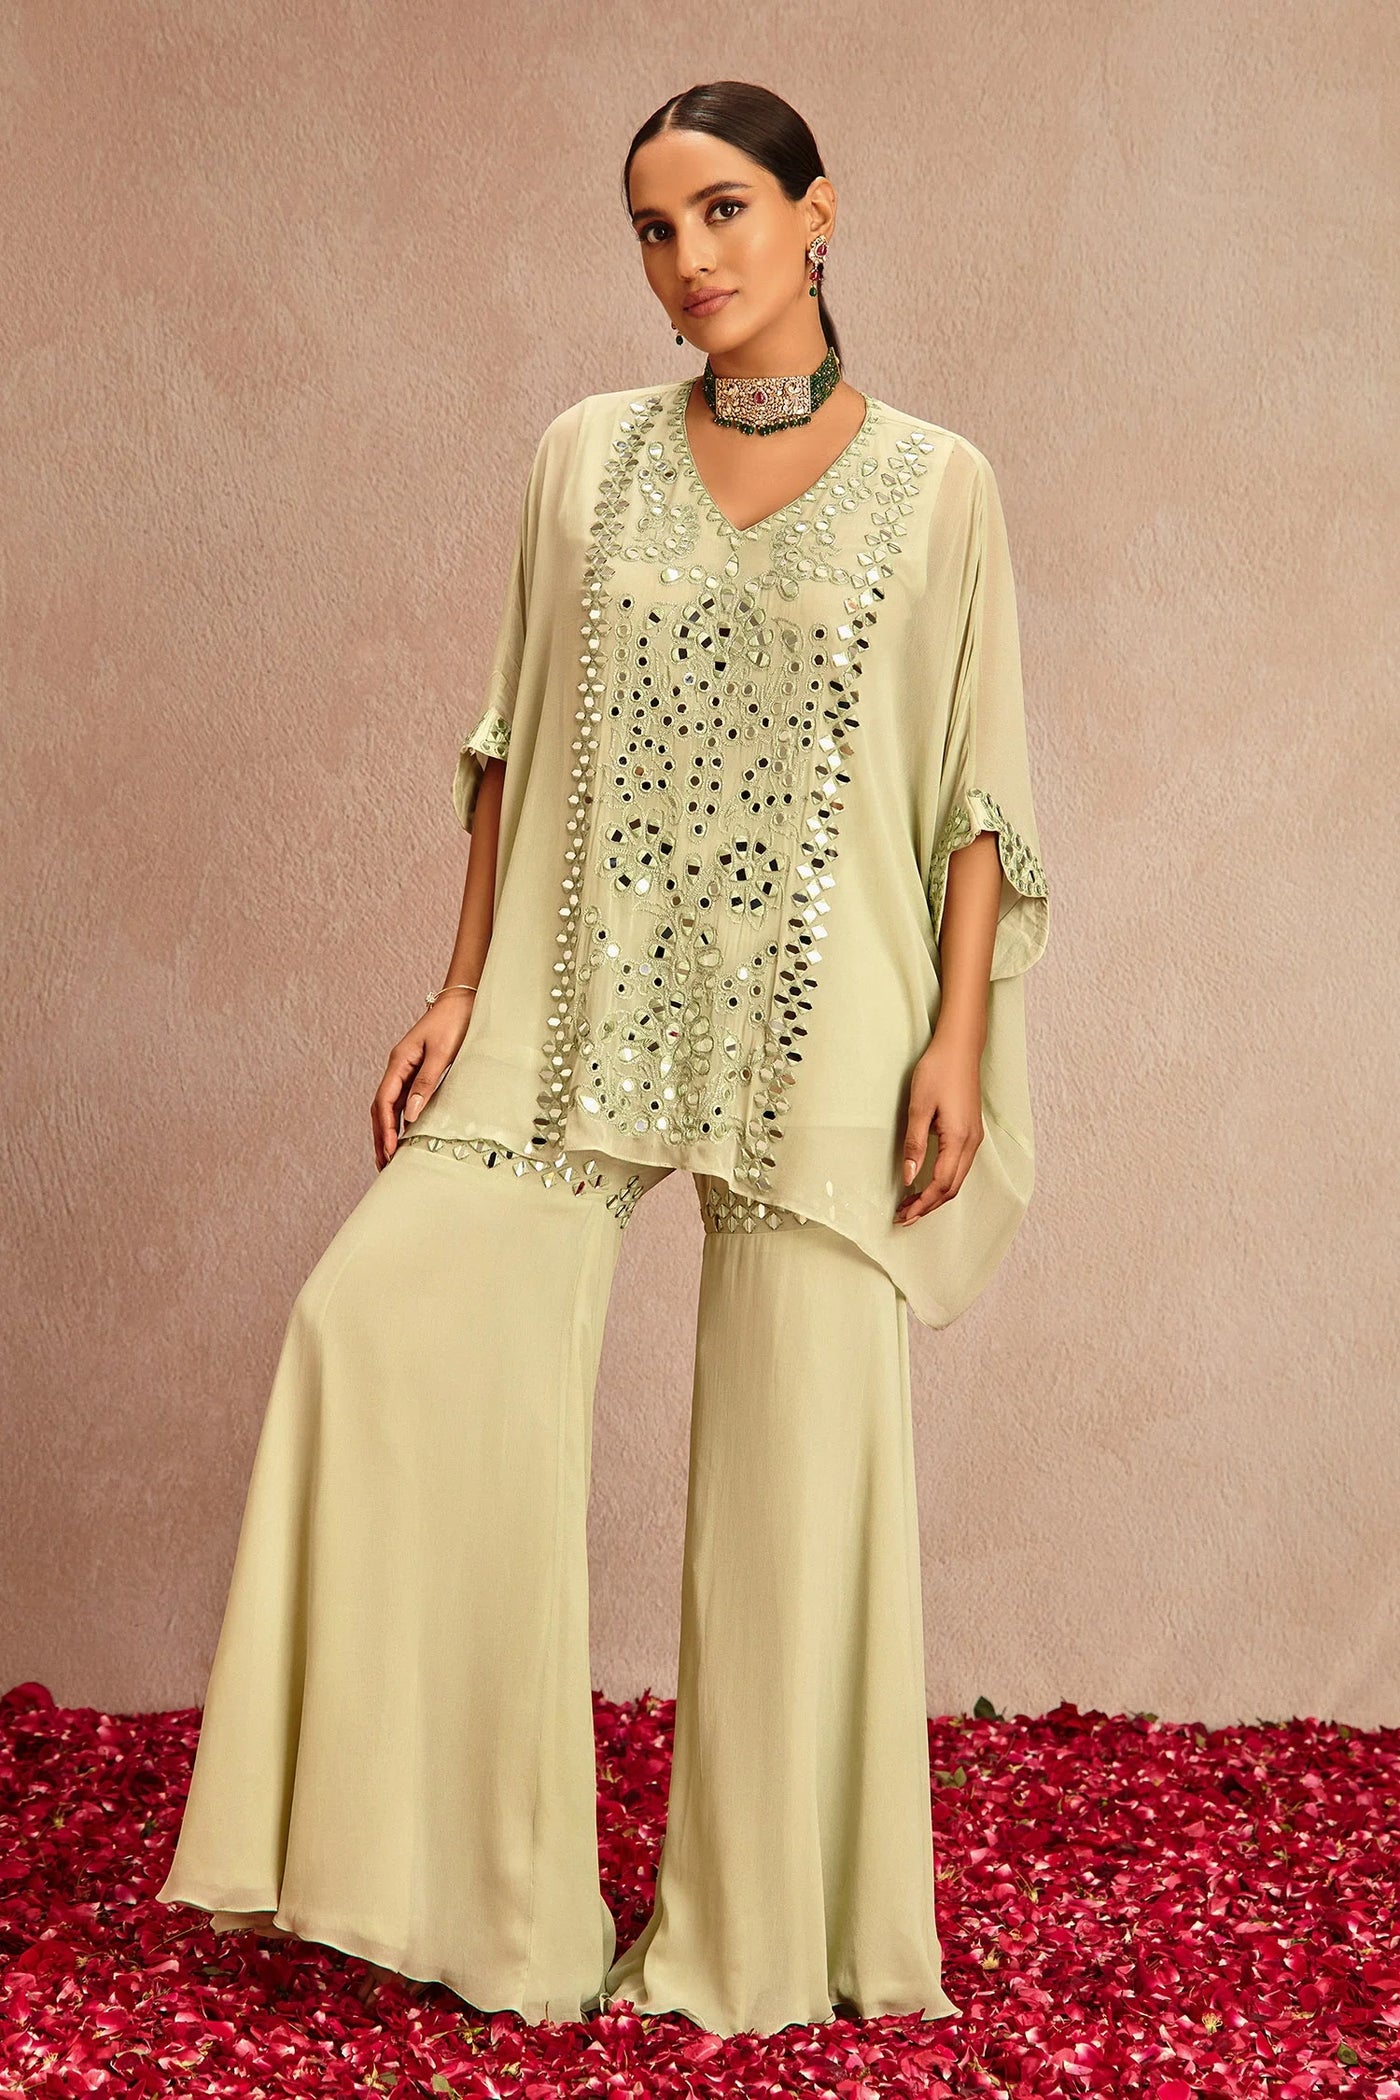 Sage Mirror Embroidered Sharara Set Indian Clothing in Denver, CO, Aurora, CO, Boulder, CO, Fort Collins, CO, Colorado Springs, CO, Parker, CO, Highlands Ranch, CO, Cherry Creek, CO, Centennial, CO, and Longmont, CO. NATIONWIDE SHIPPING USA- India Fashion X